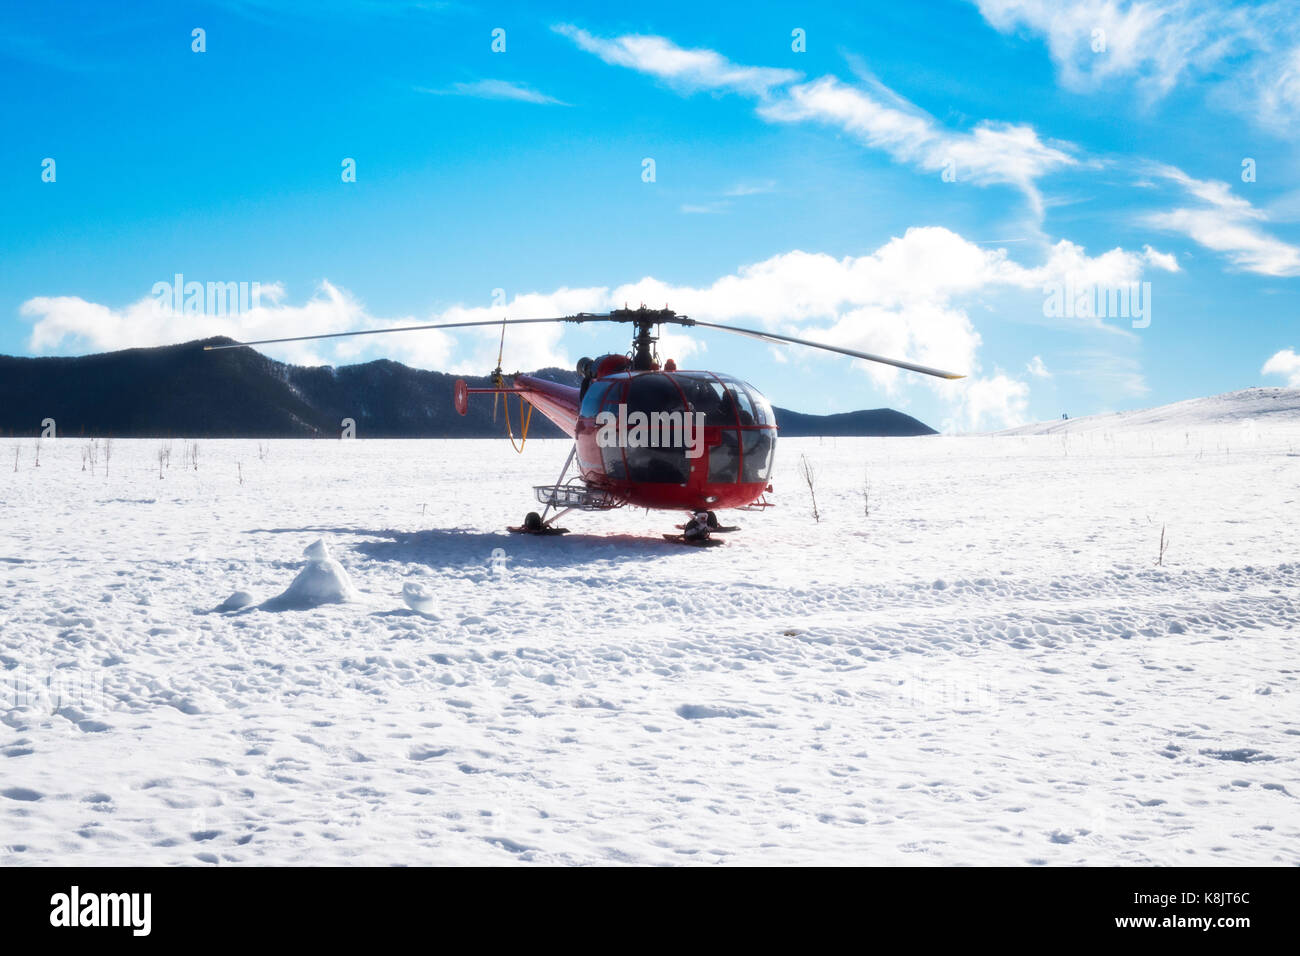 Helicopter skiing Stock Photo